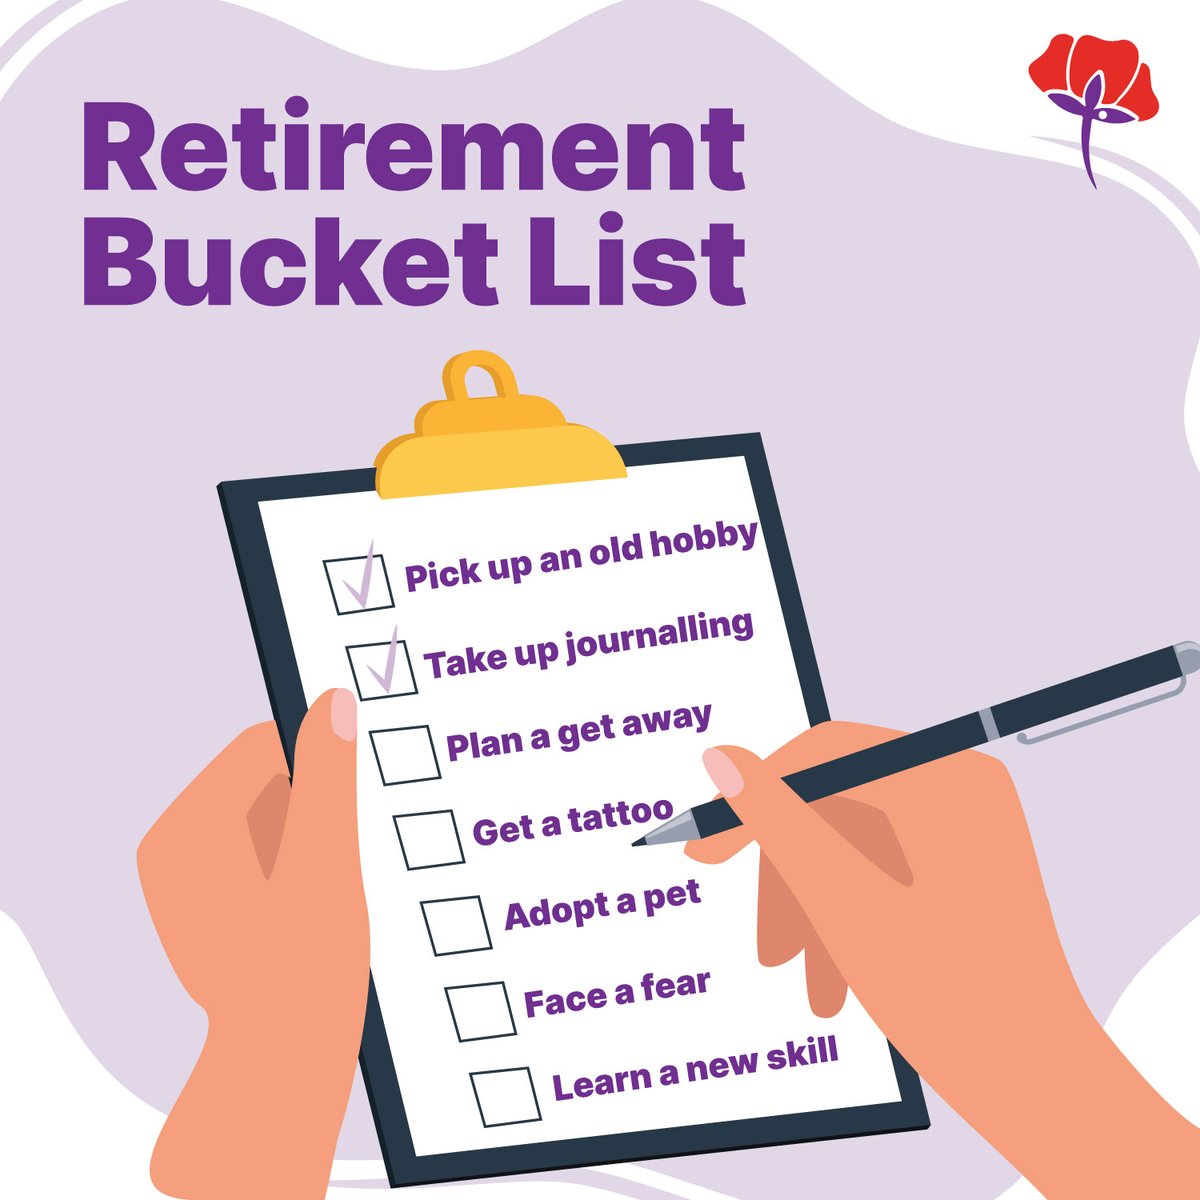 Retirement is not an end, but a new beginning full of endless possibilities! From exploring new destinations to pursuing long-awaited hobbies, create the ultimate retirement bucket list. Share your aspirations with us below! #RetirementBucketList #NewBeginnings